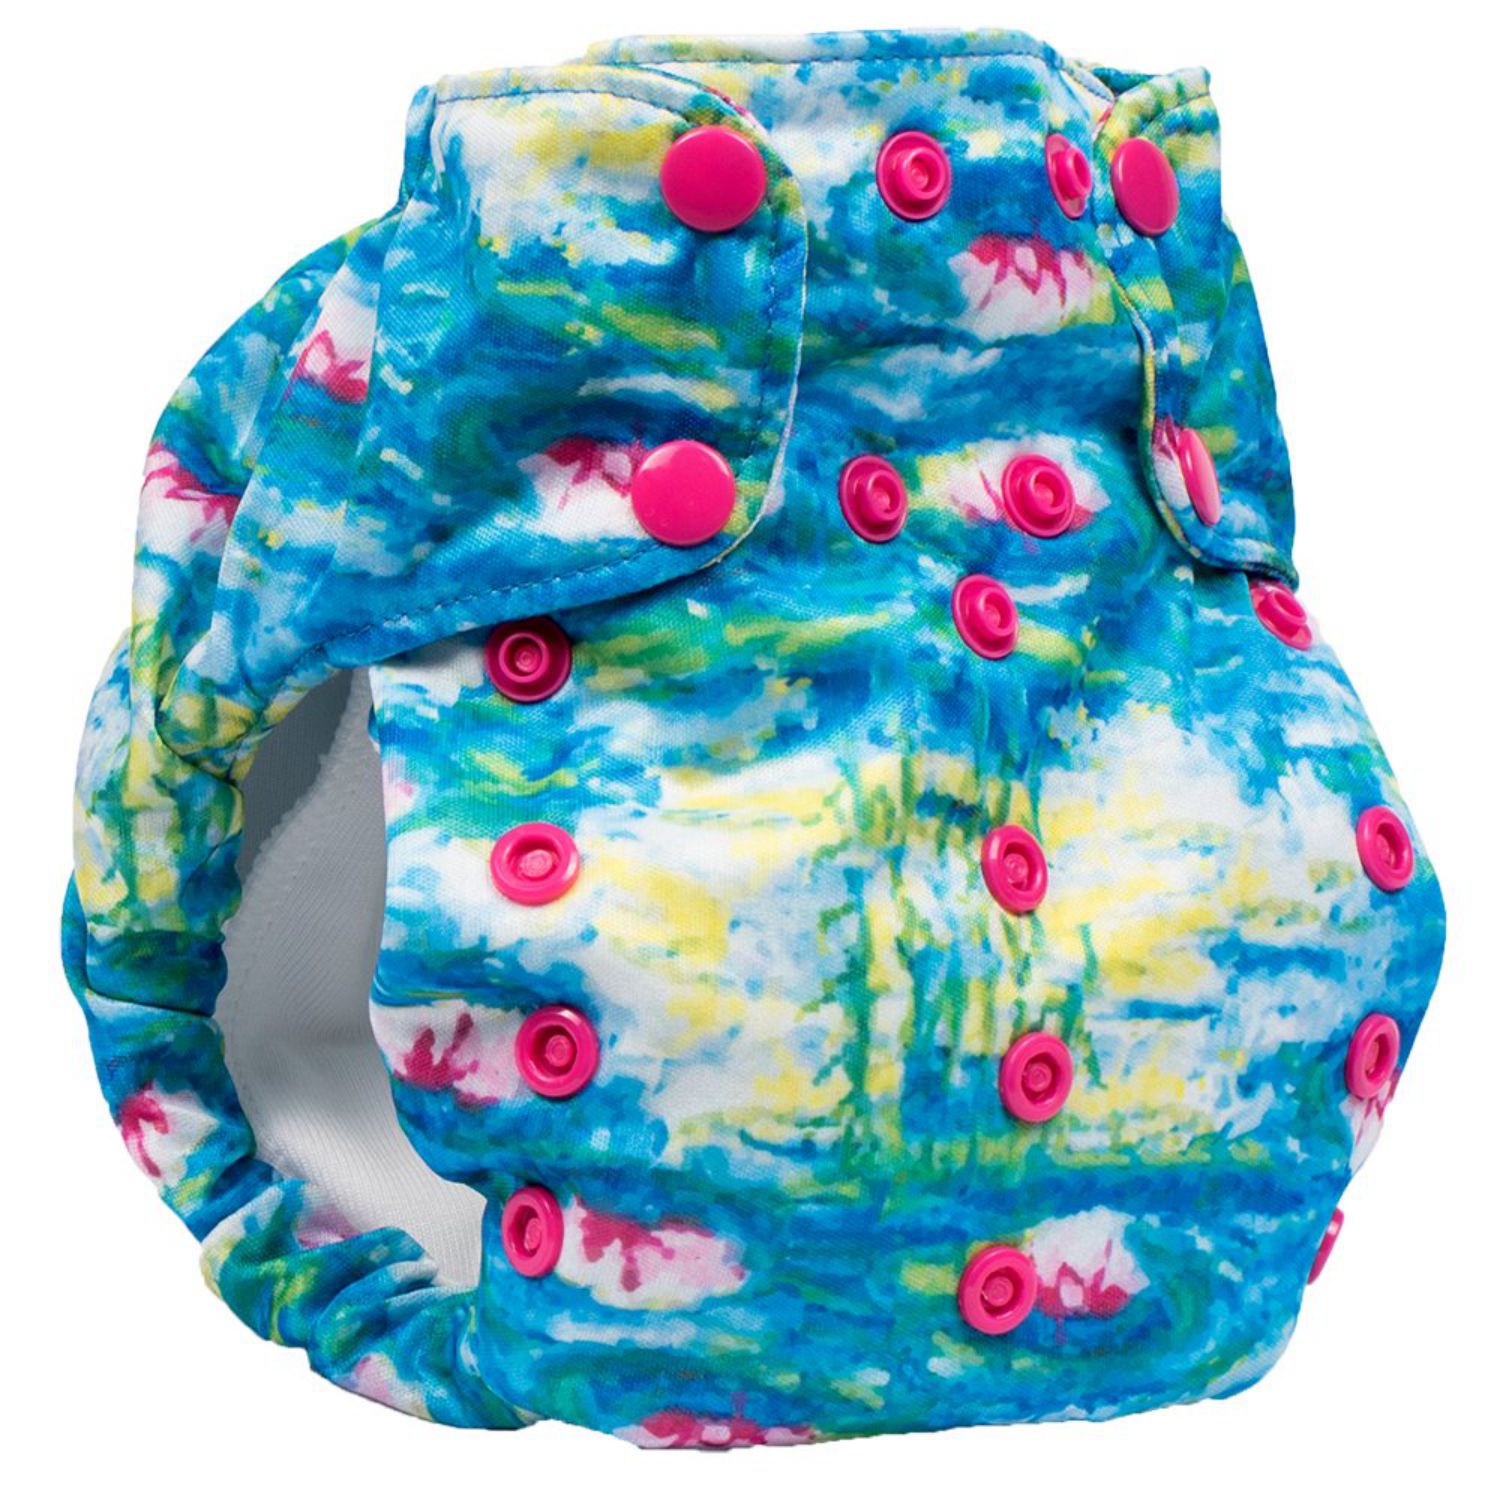 Smart Bottoms Dream Diaper 2.0 AIO One Size Pattern: Water Lillies